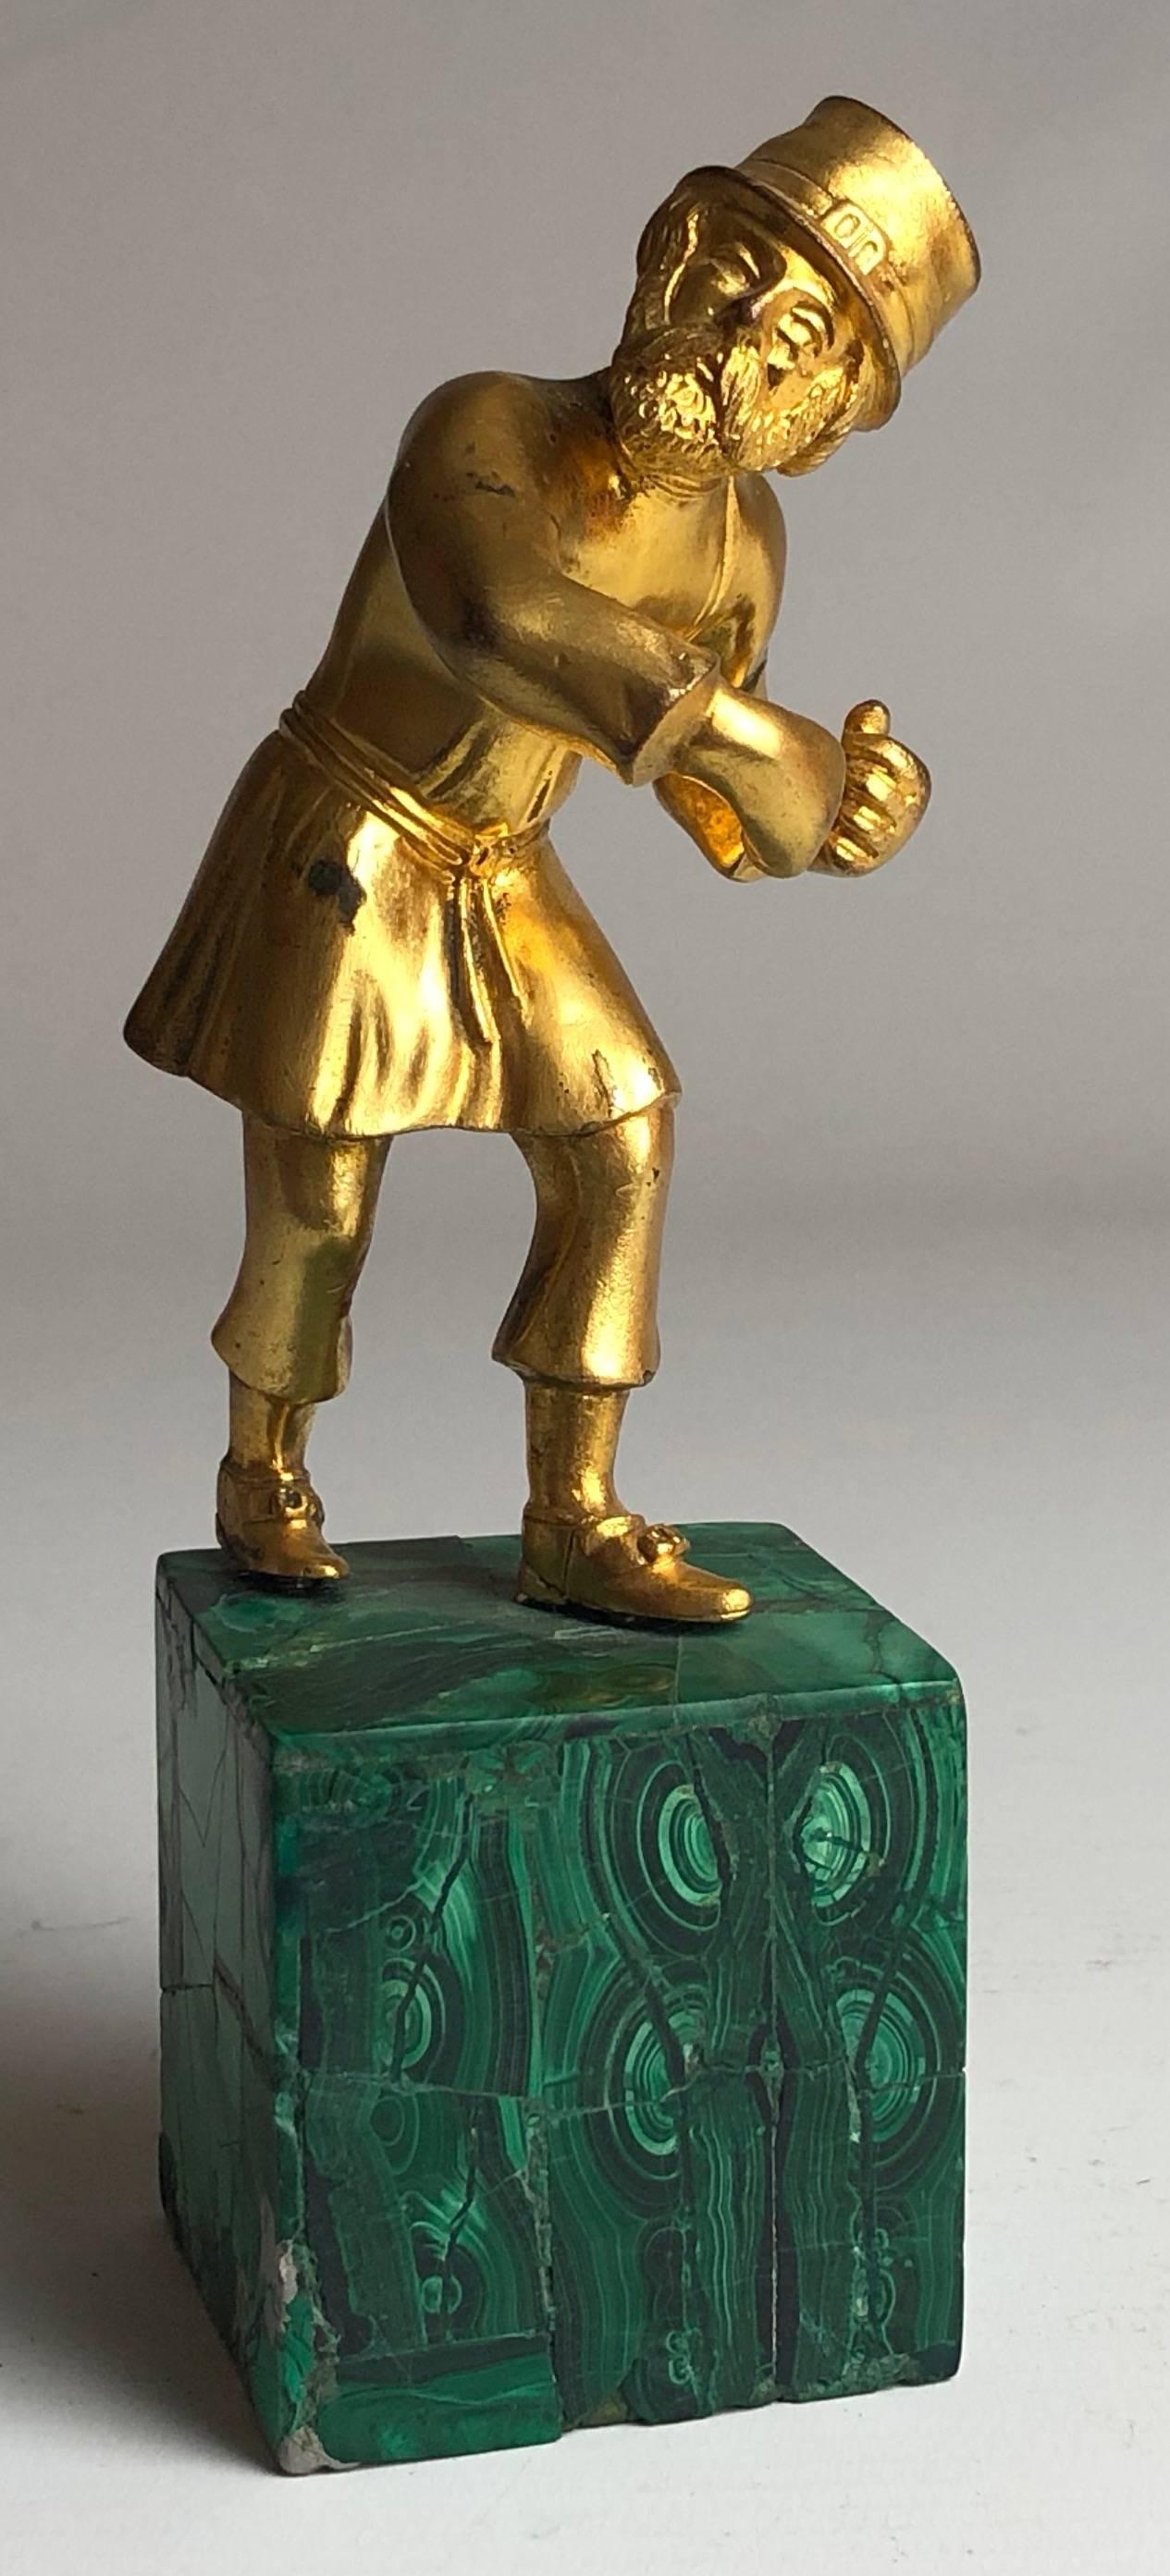 An early 20th century Russian gilded bronze, finely modelled as a traditional Cossack, on a Malachite base,

Russian, circa 1900.

Measure: He stands 6